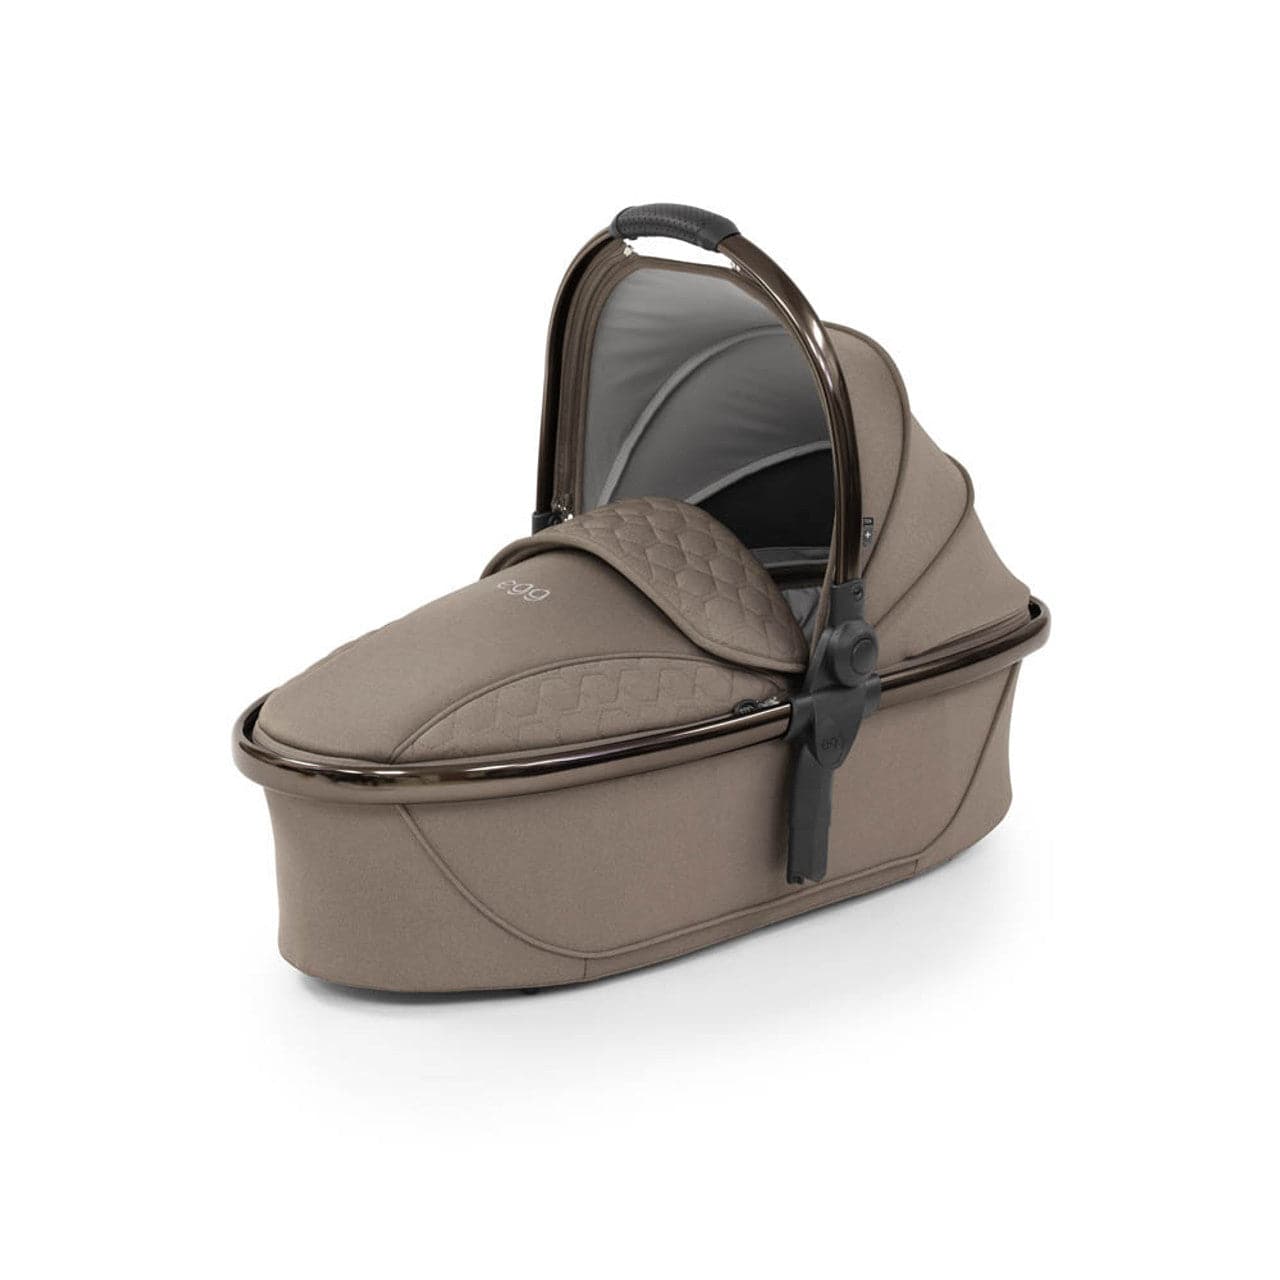 Egg® 2 Pushchair + Carrycot - Mink - For Your Little One